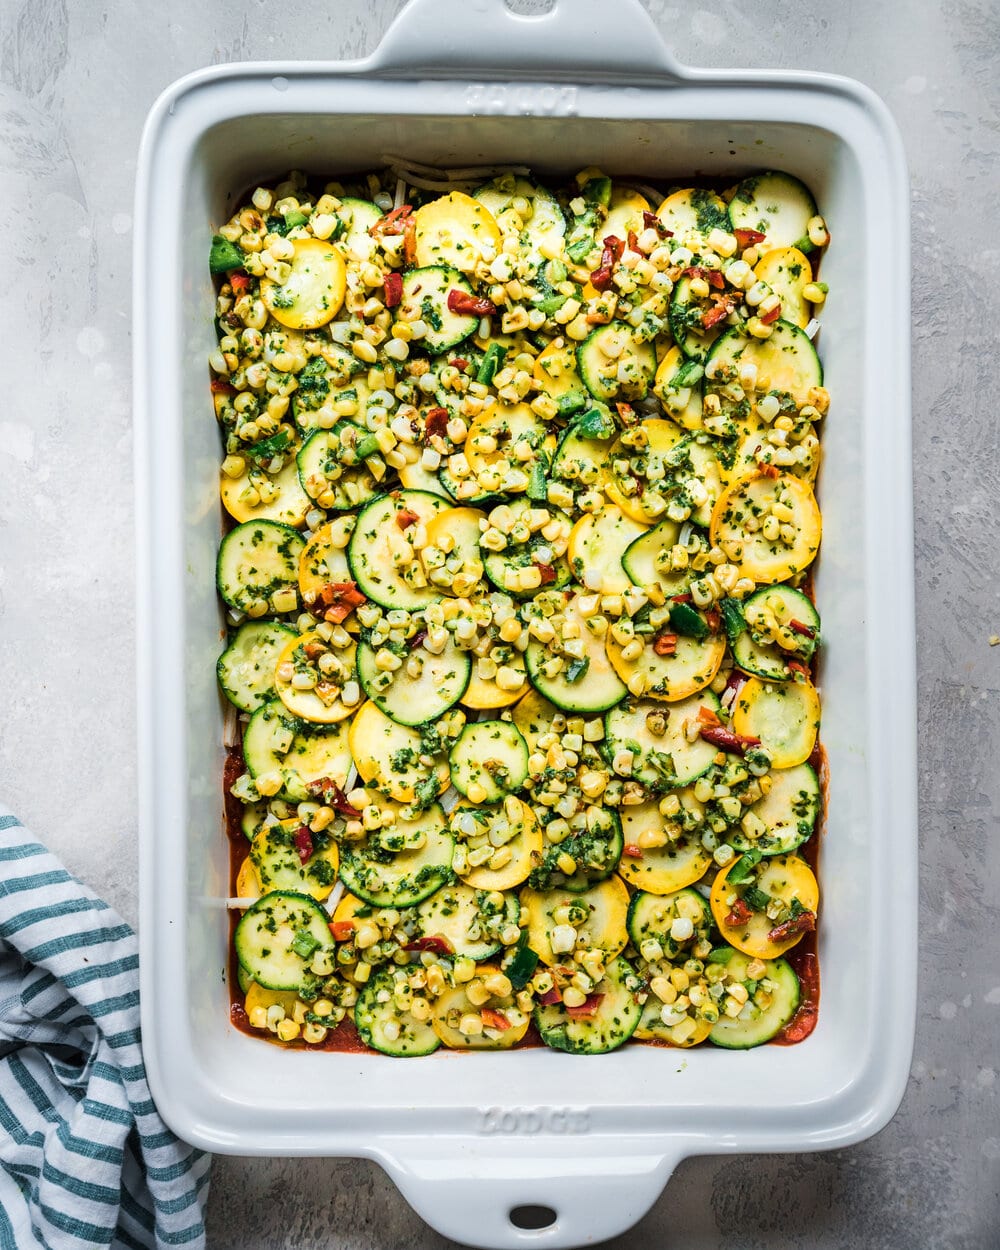 another layer of zucchini, corn, jalapeno, basil mixture in casserole pan